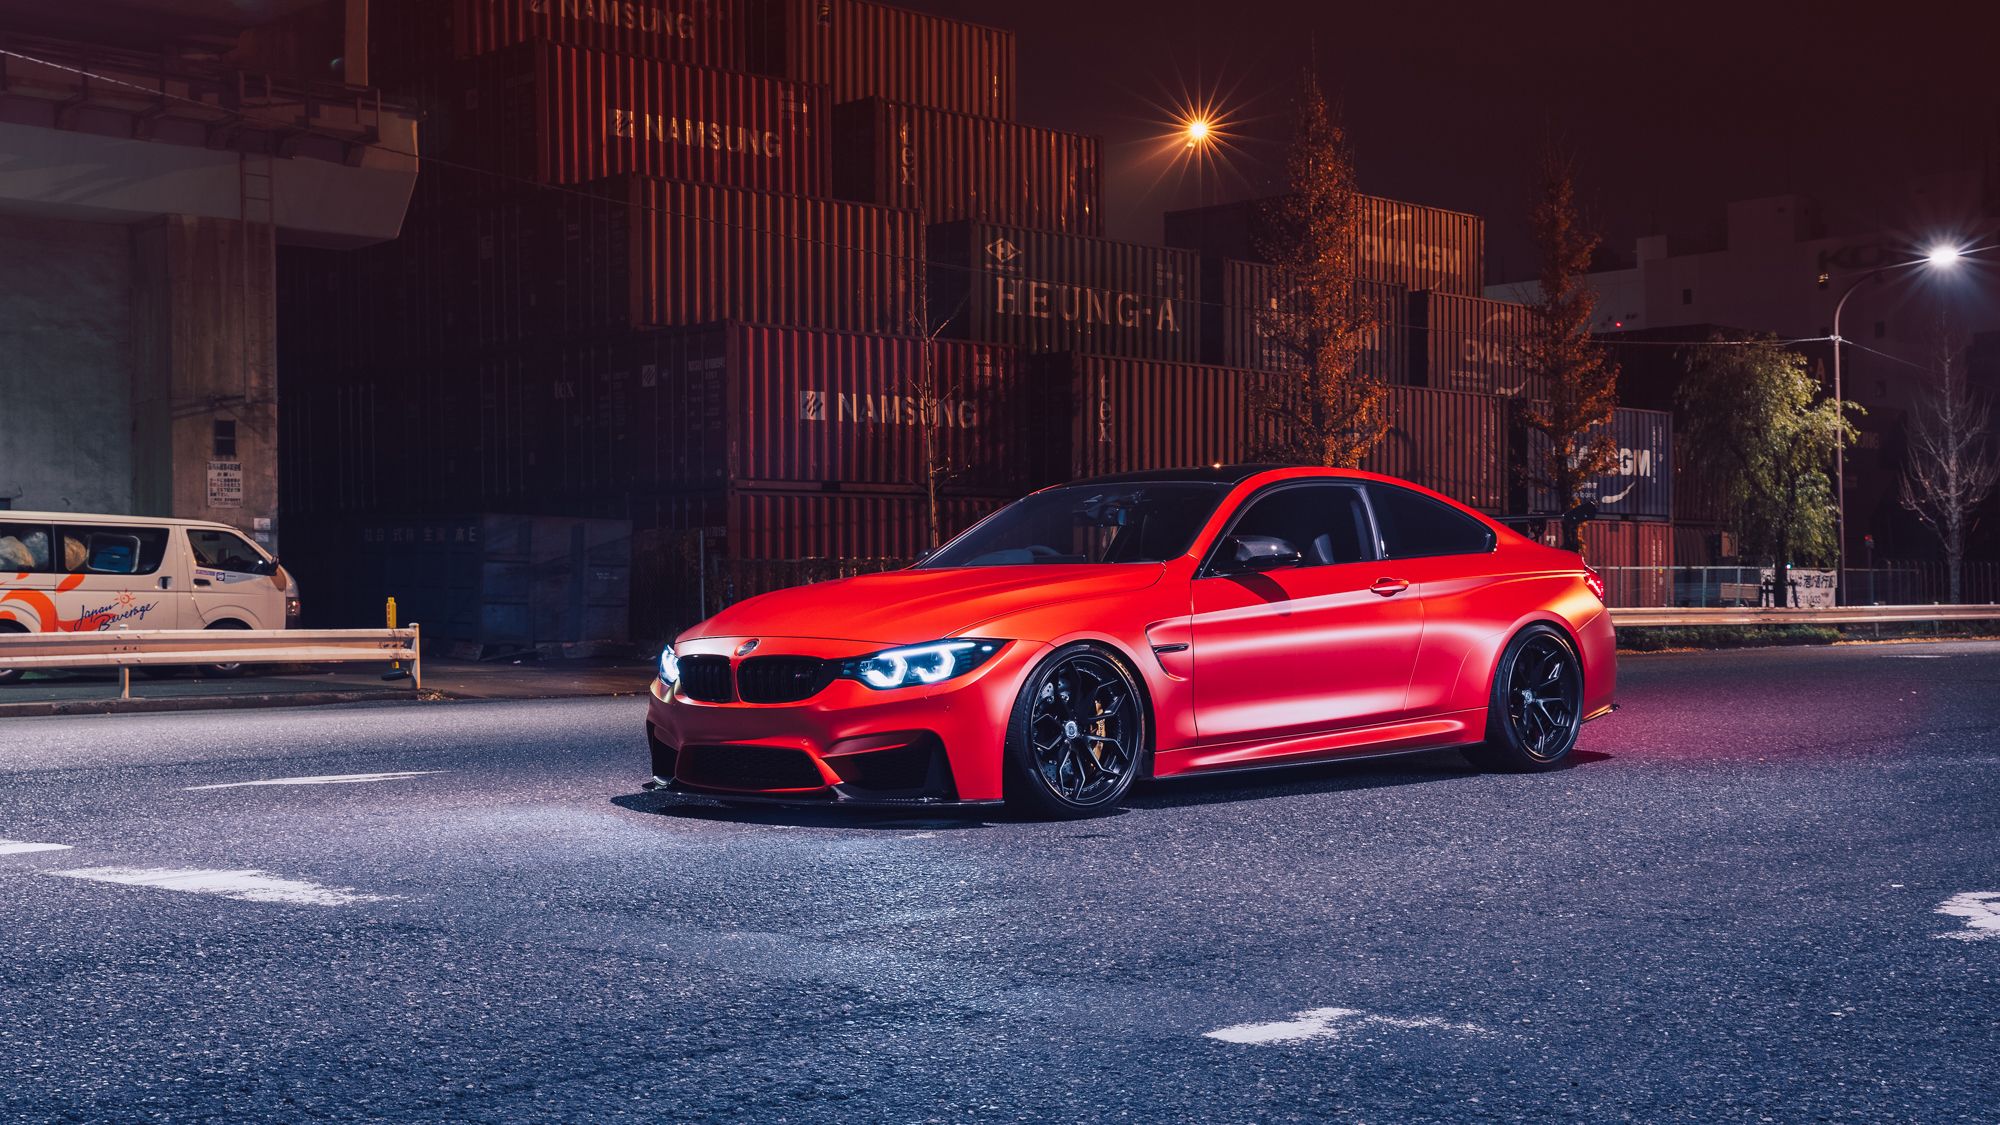 Bmw M4 Convertible Wallpapers